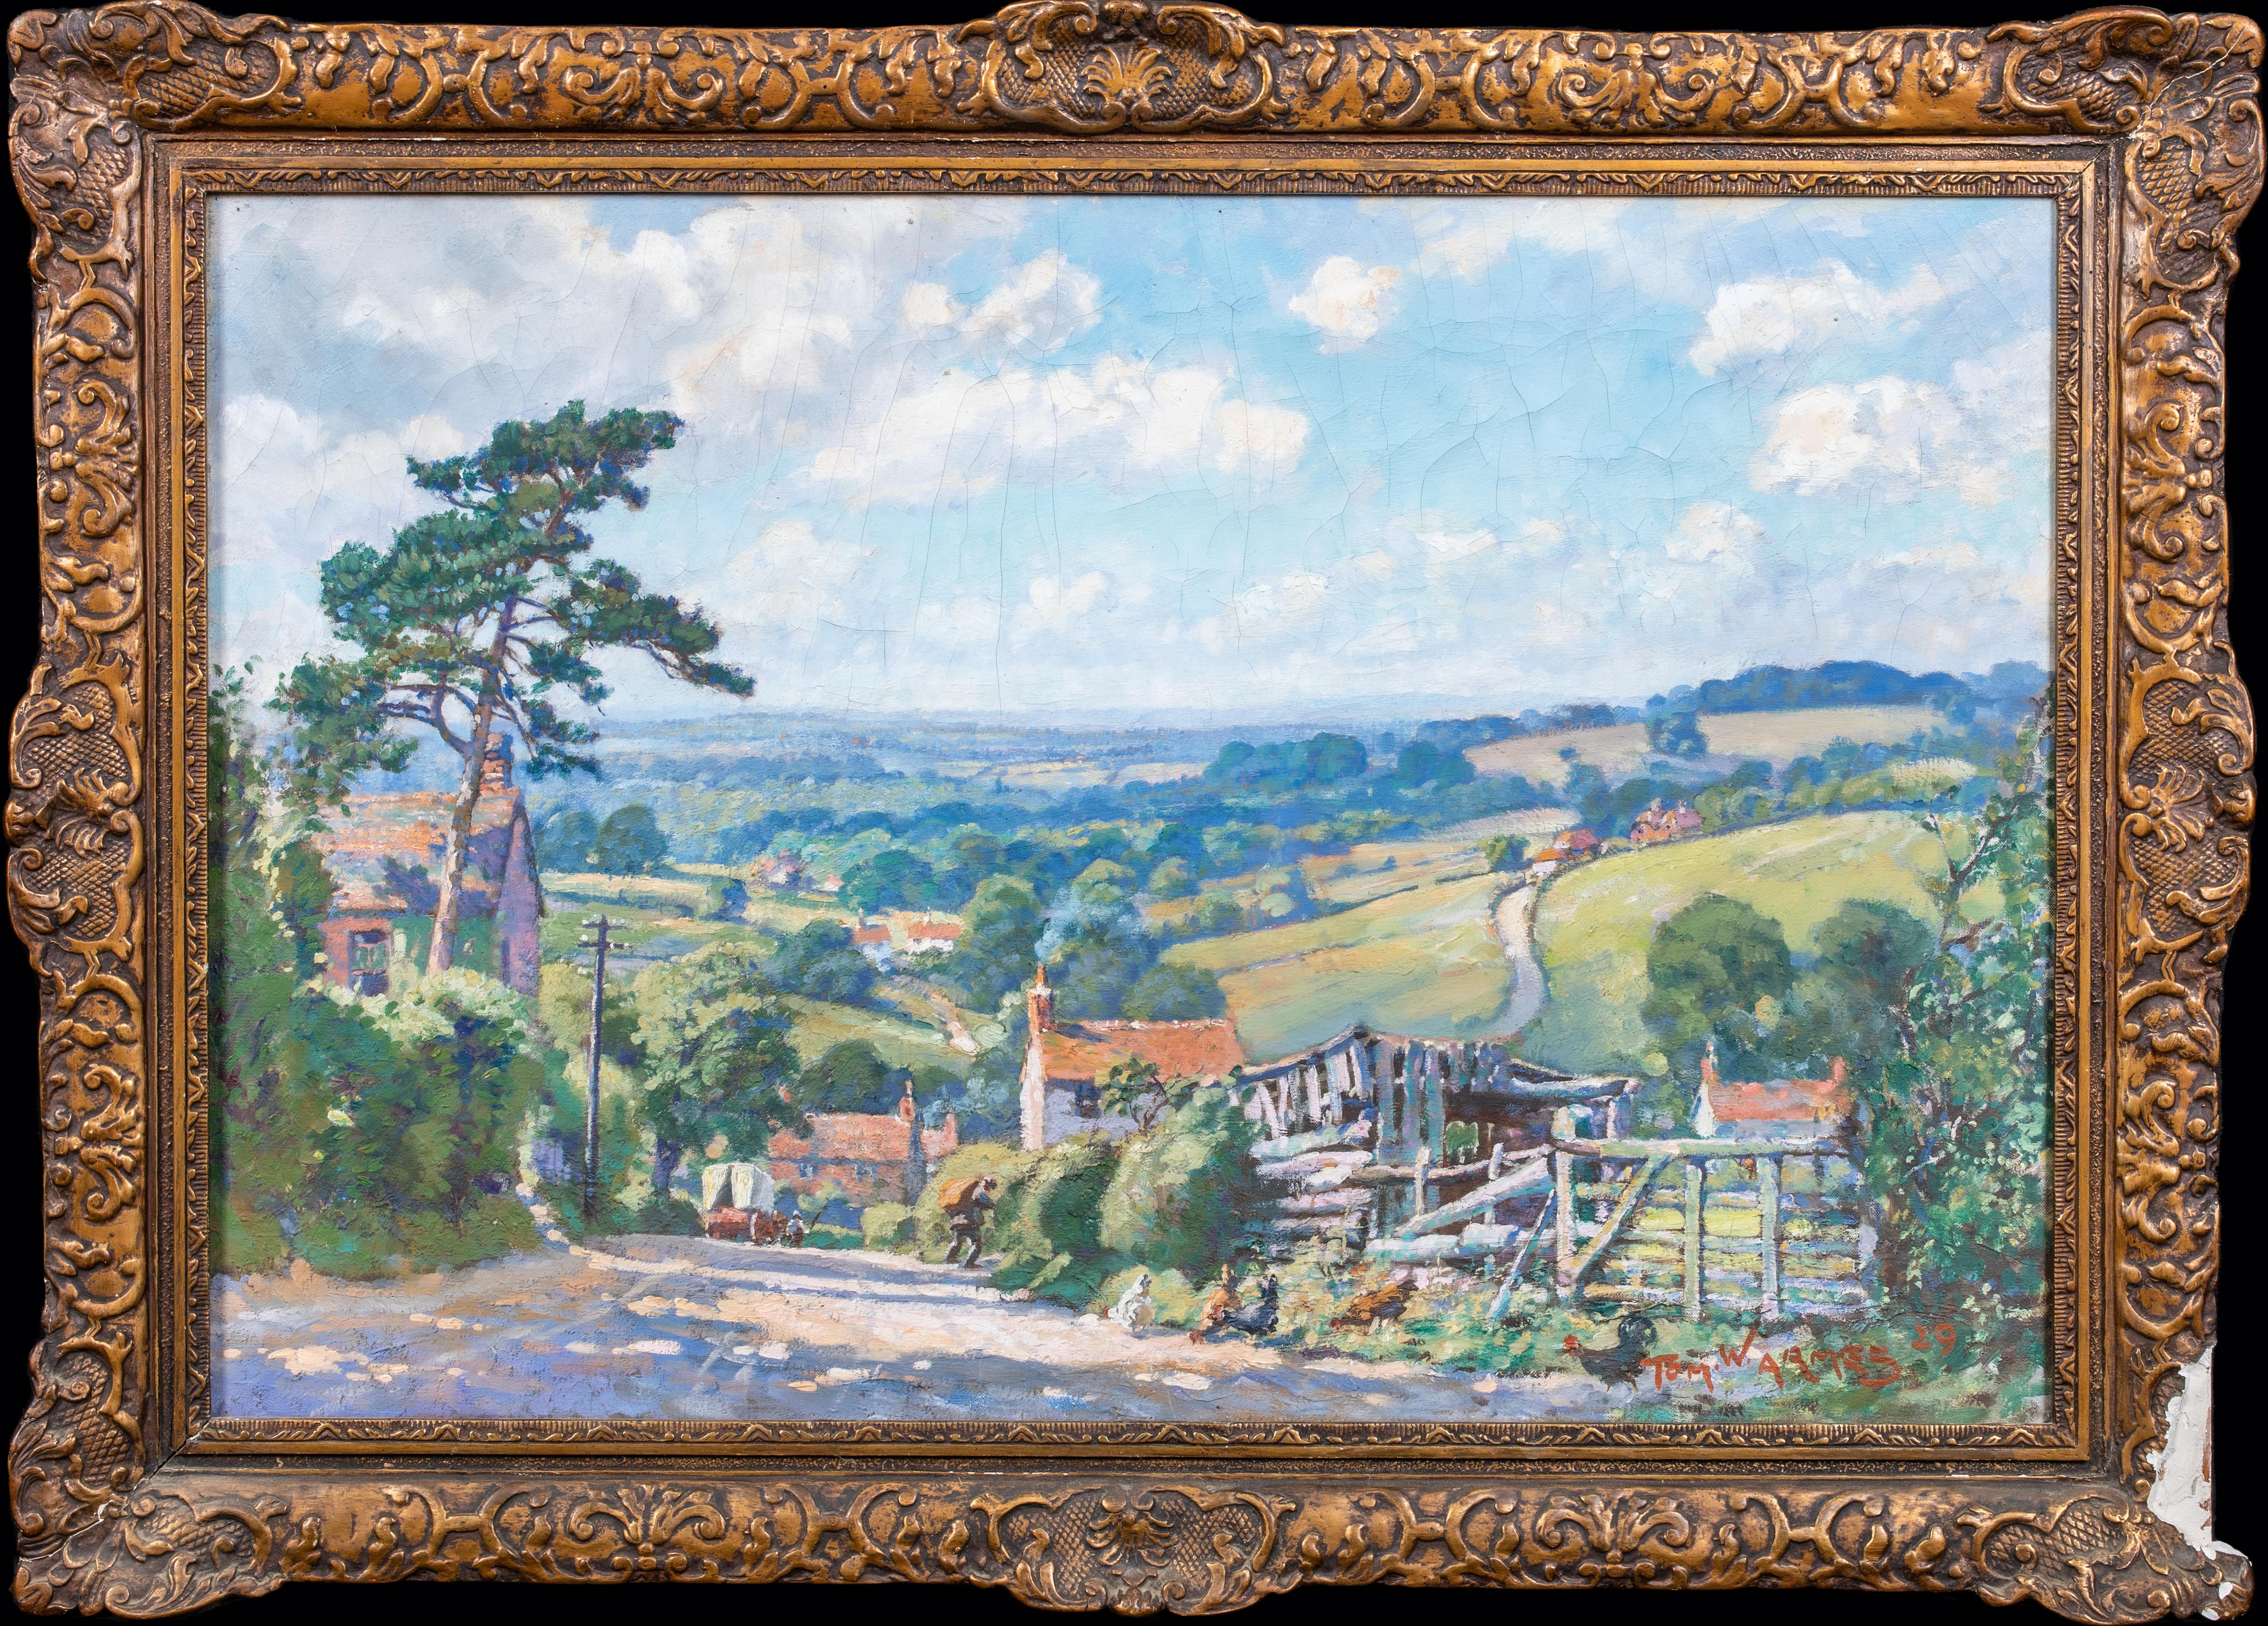 Unknown Landscape Painting - A Country Lane, Somerset, dated 1939  by THOMAS WILLIAM ARMES (1894-1963)